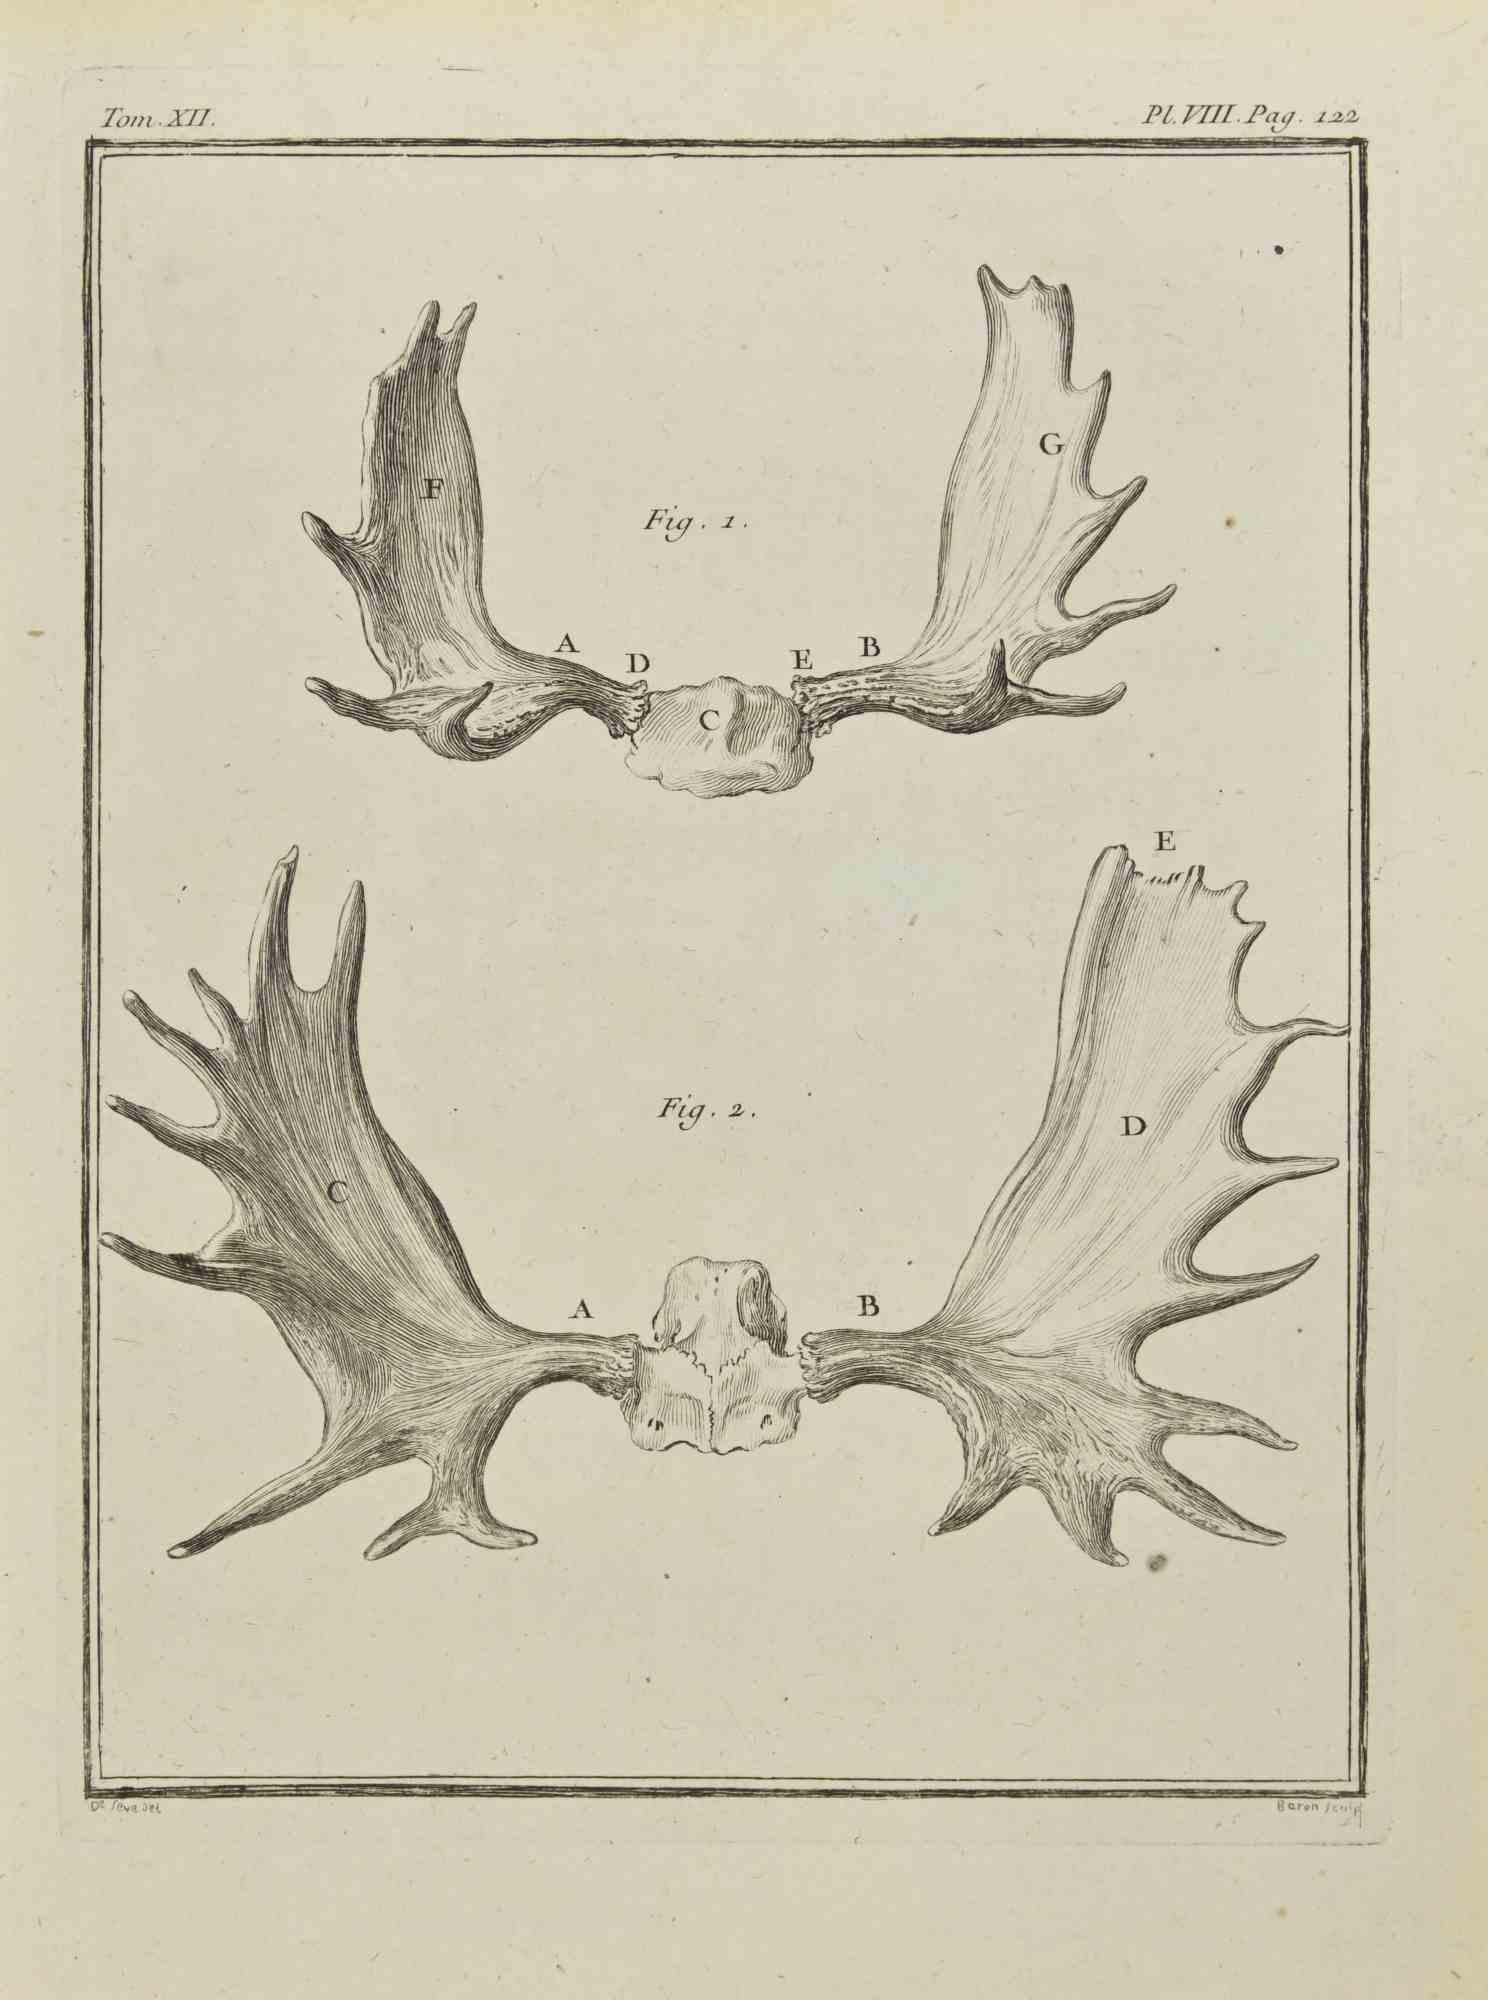 The Horns is an etching realized by Jacques Baron in 1771.

It belongs to the suite "Histoire Naturelle de Buffon".

The Artist's signature is engraved lower right.

Good conditions.